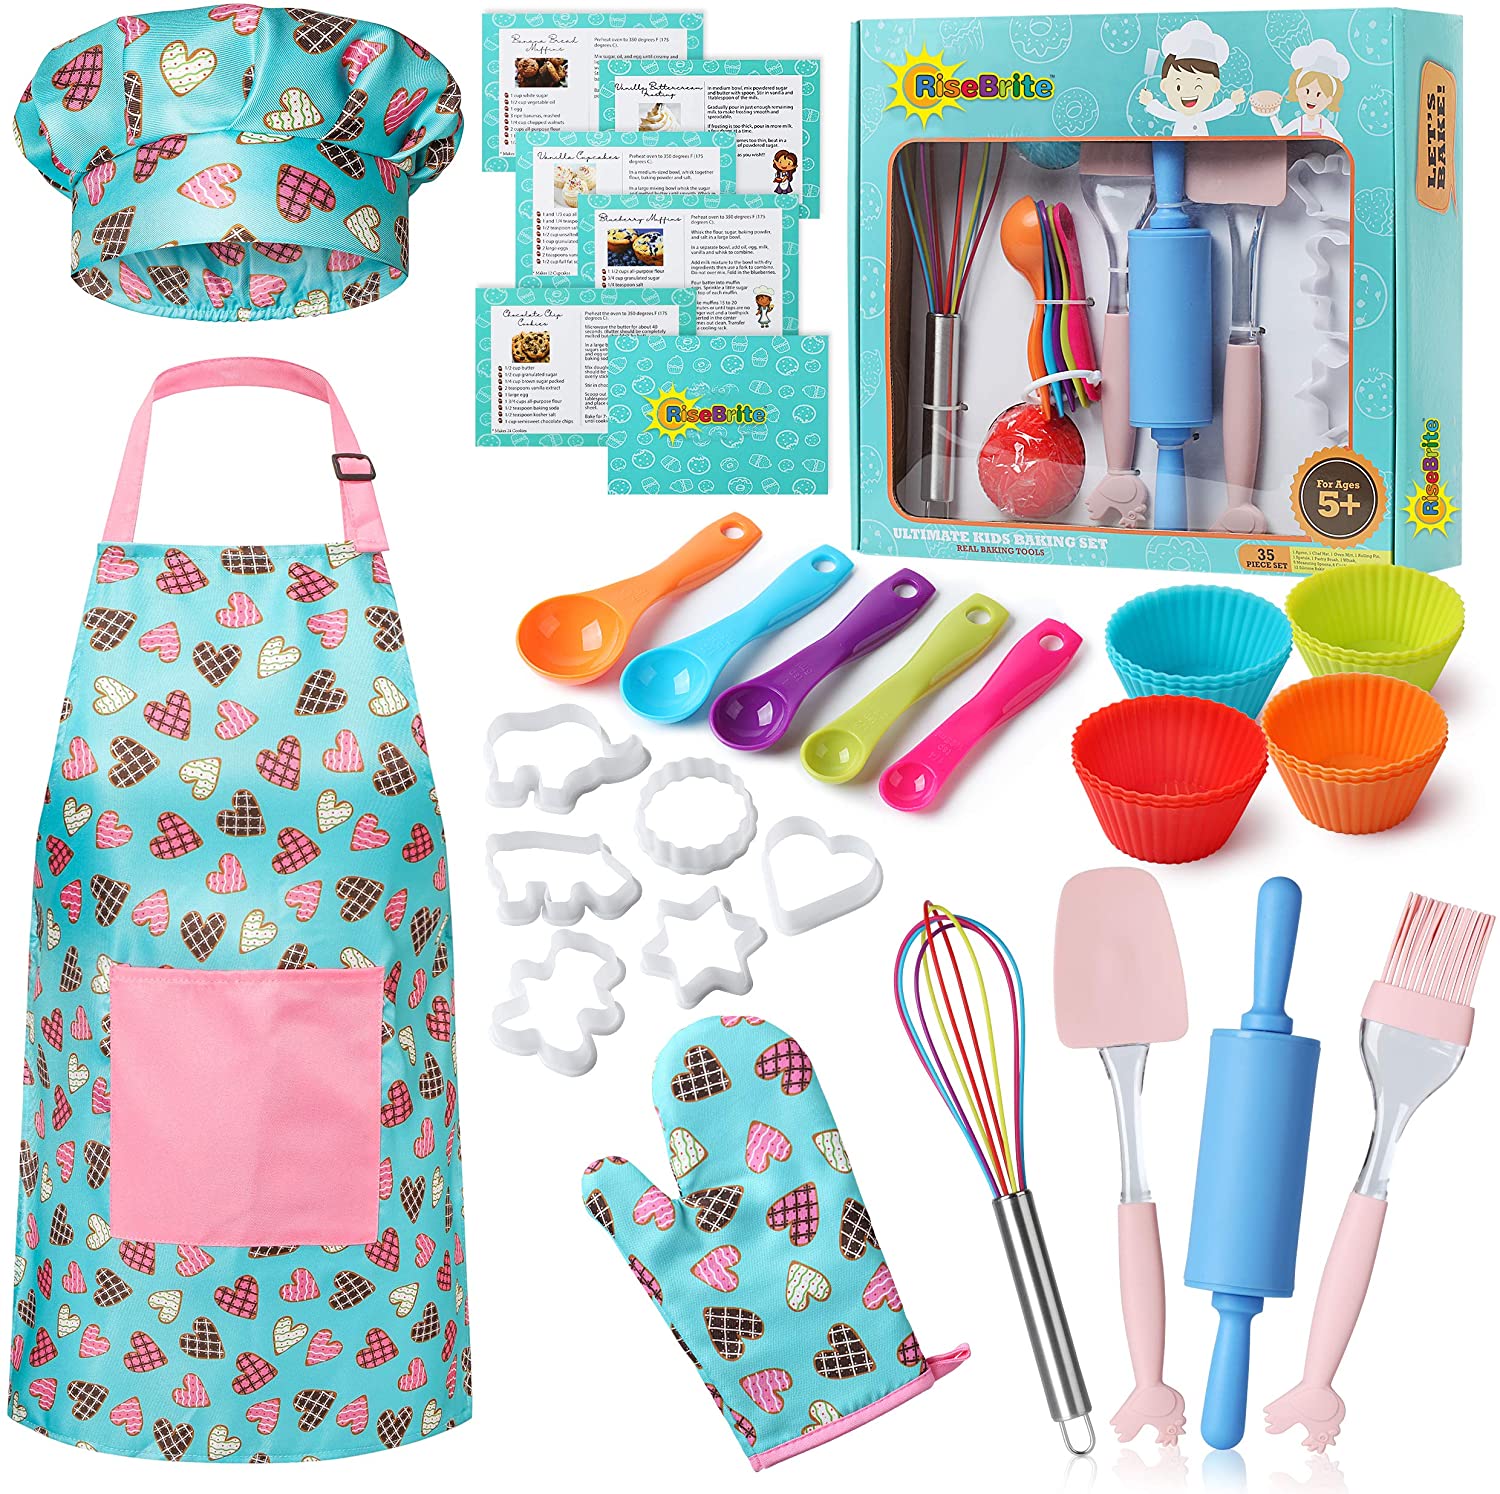 Cake Mold 11Pcs Childrens Baking Set Cooking Apron Childrens Kitchen Baking Girl Toy Set Including Chef Hat Apron Spoon,Eggbeater Small Cloth Rolling Pin 